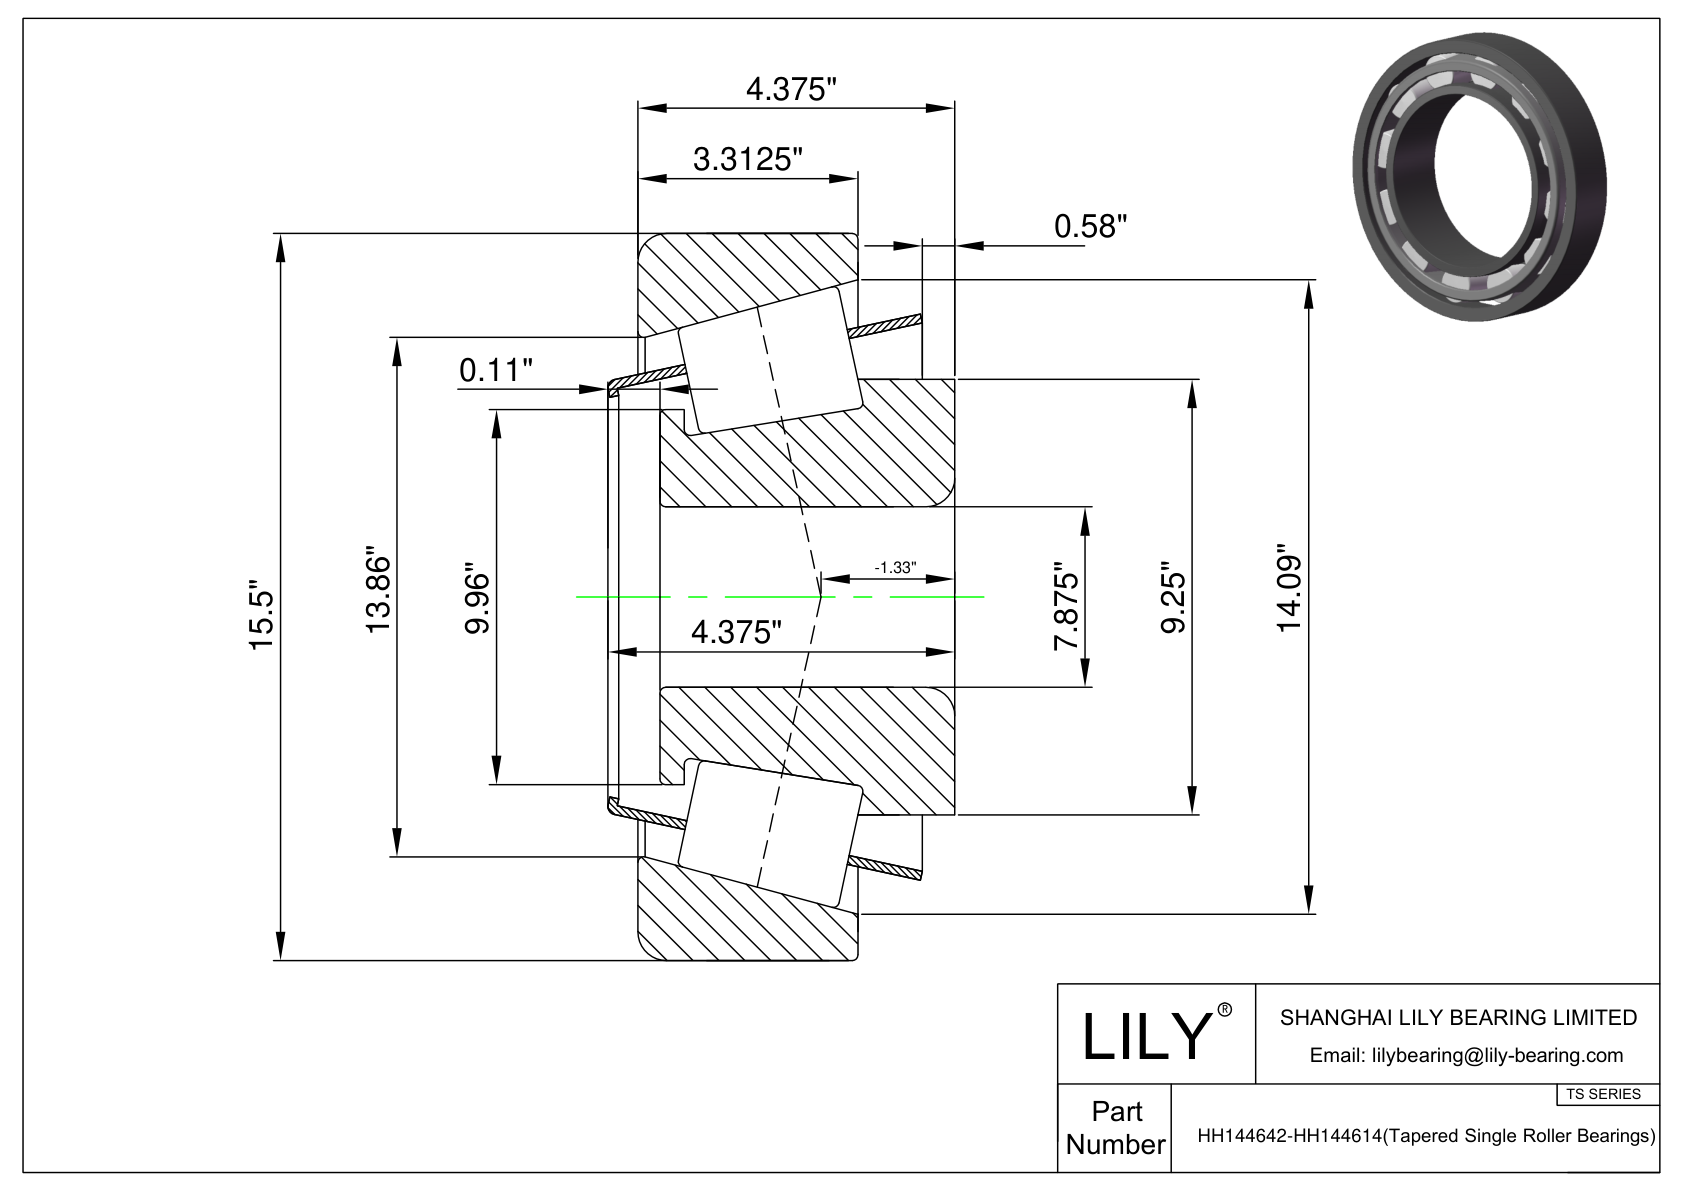 HH144642-HH144614 TS (Tapered Single Roller Bearings) (Imperial) cad drawing